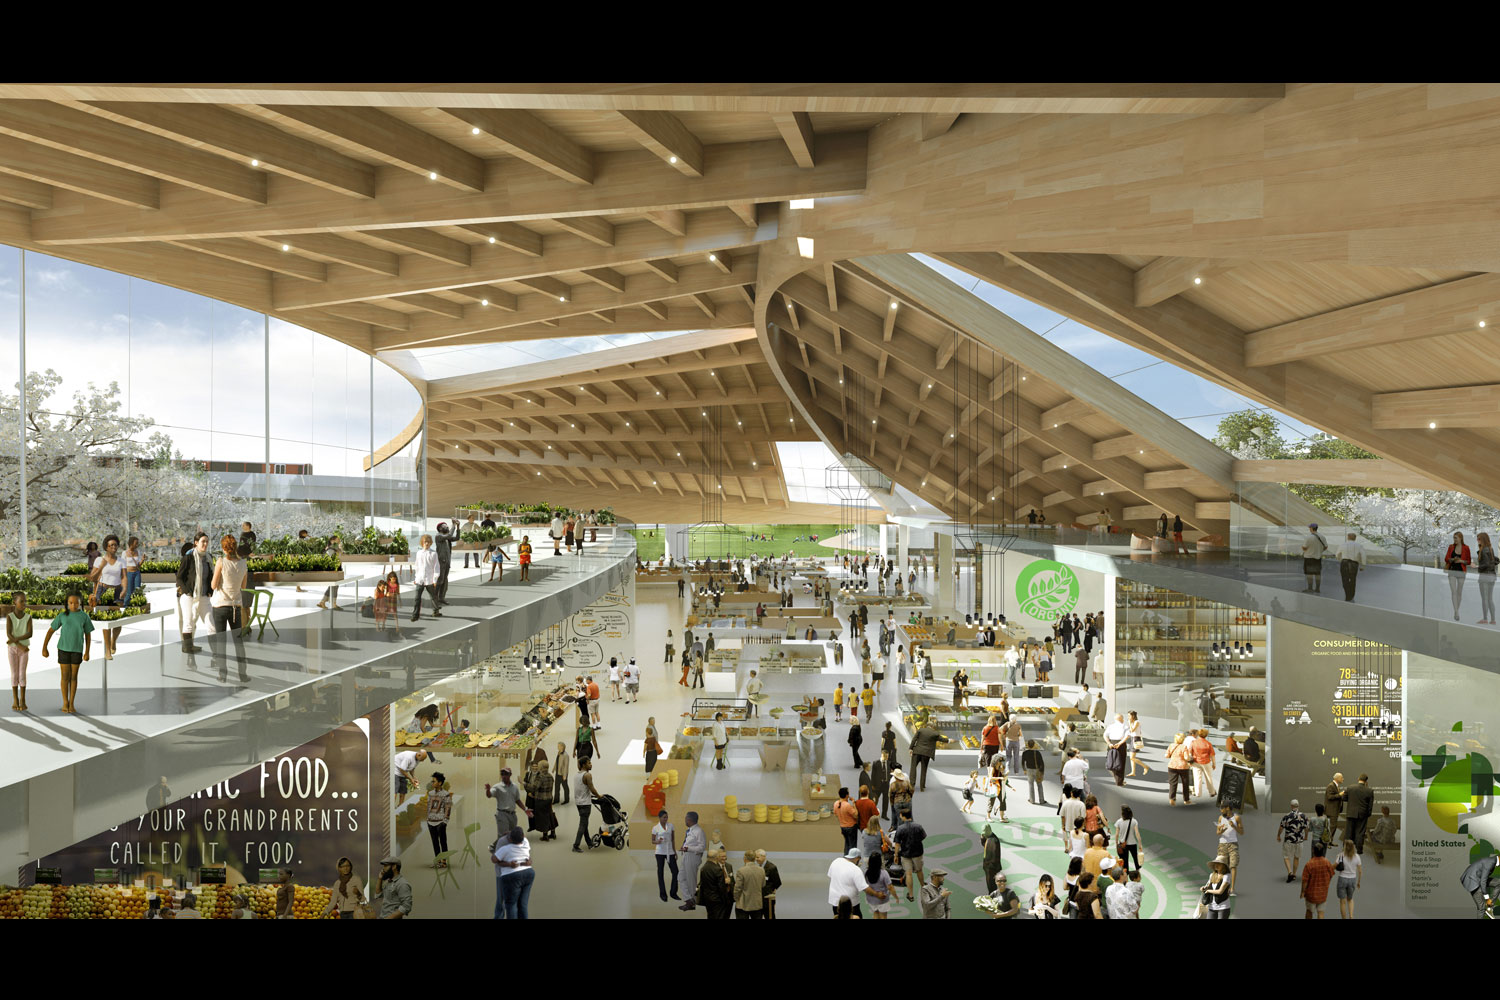 A view of the two-level market hall near Kingman Park. (Courtesy: OMA/Events DC)